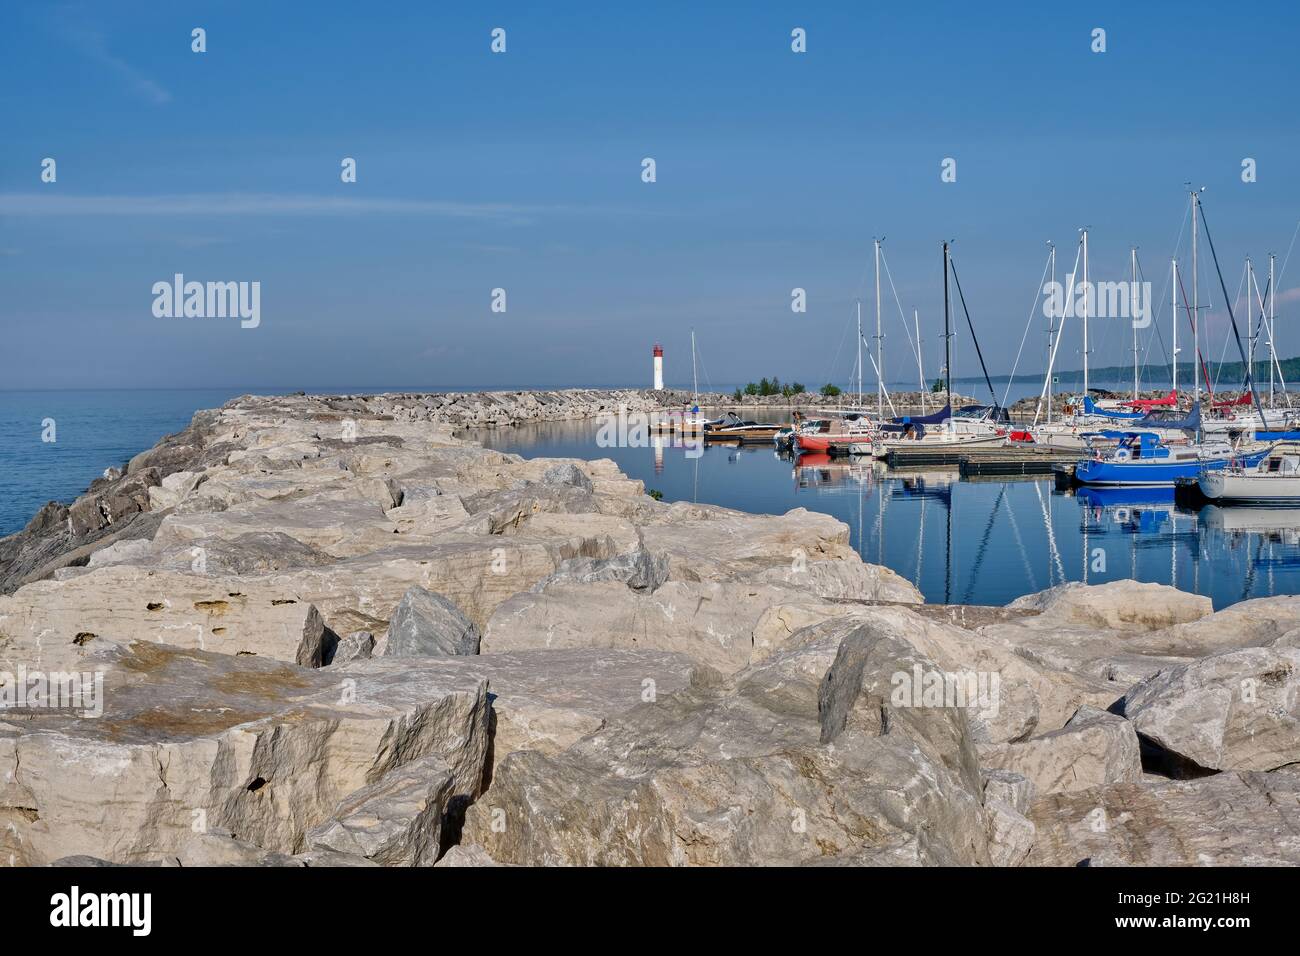 Stone breakwall protects small pleasure craft docked at Meaford Harbour. Stock Photo